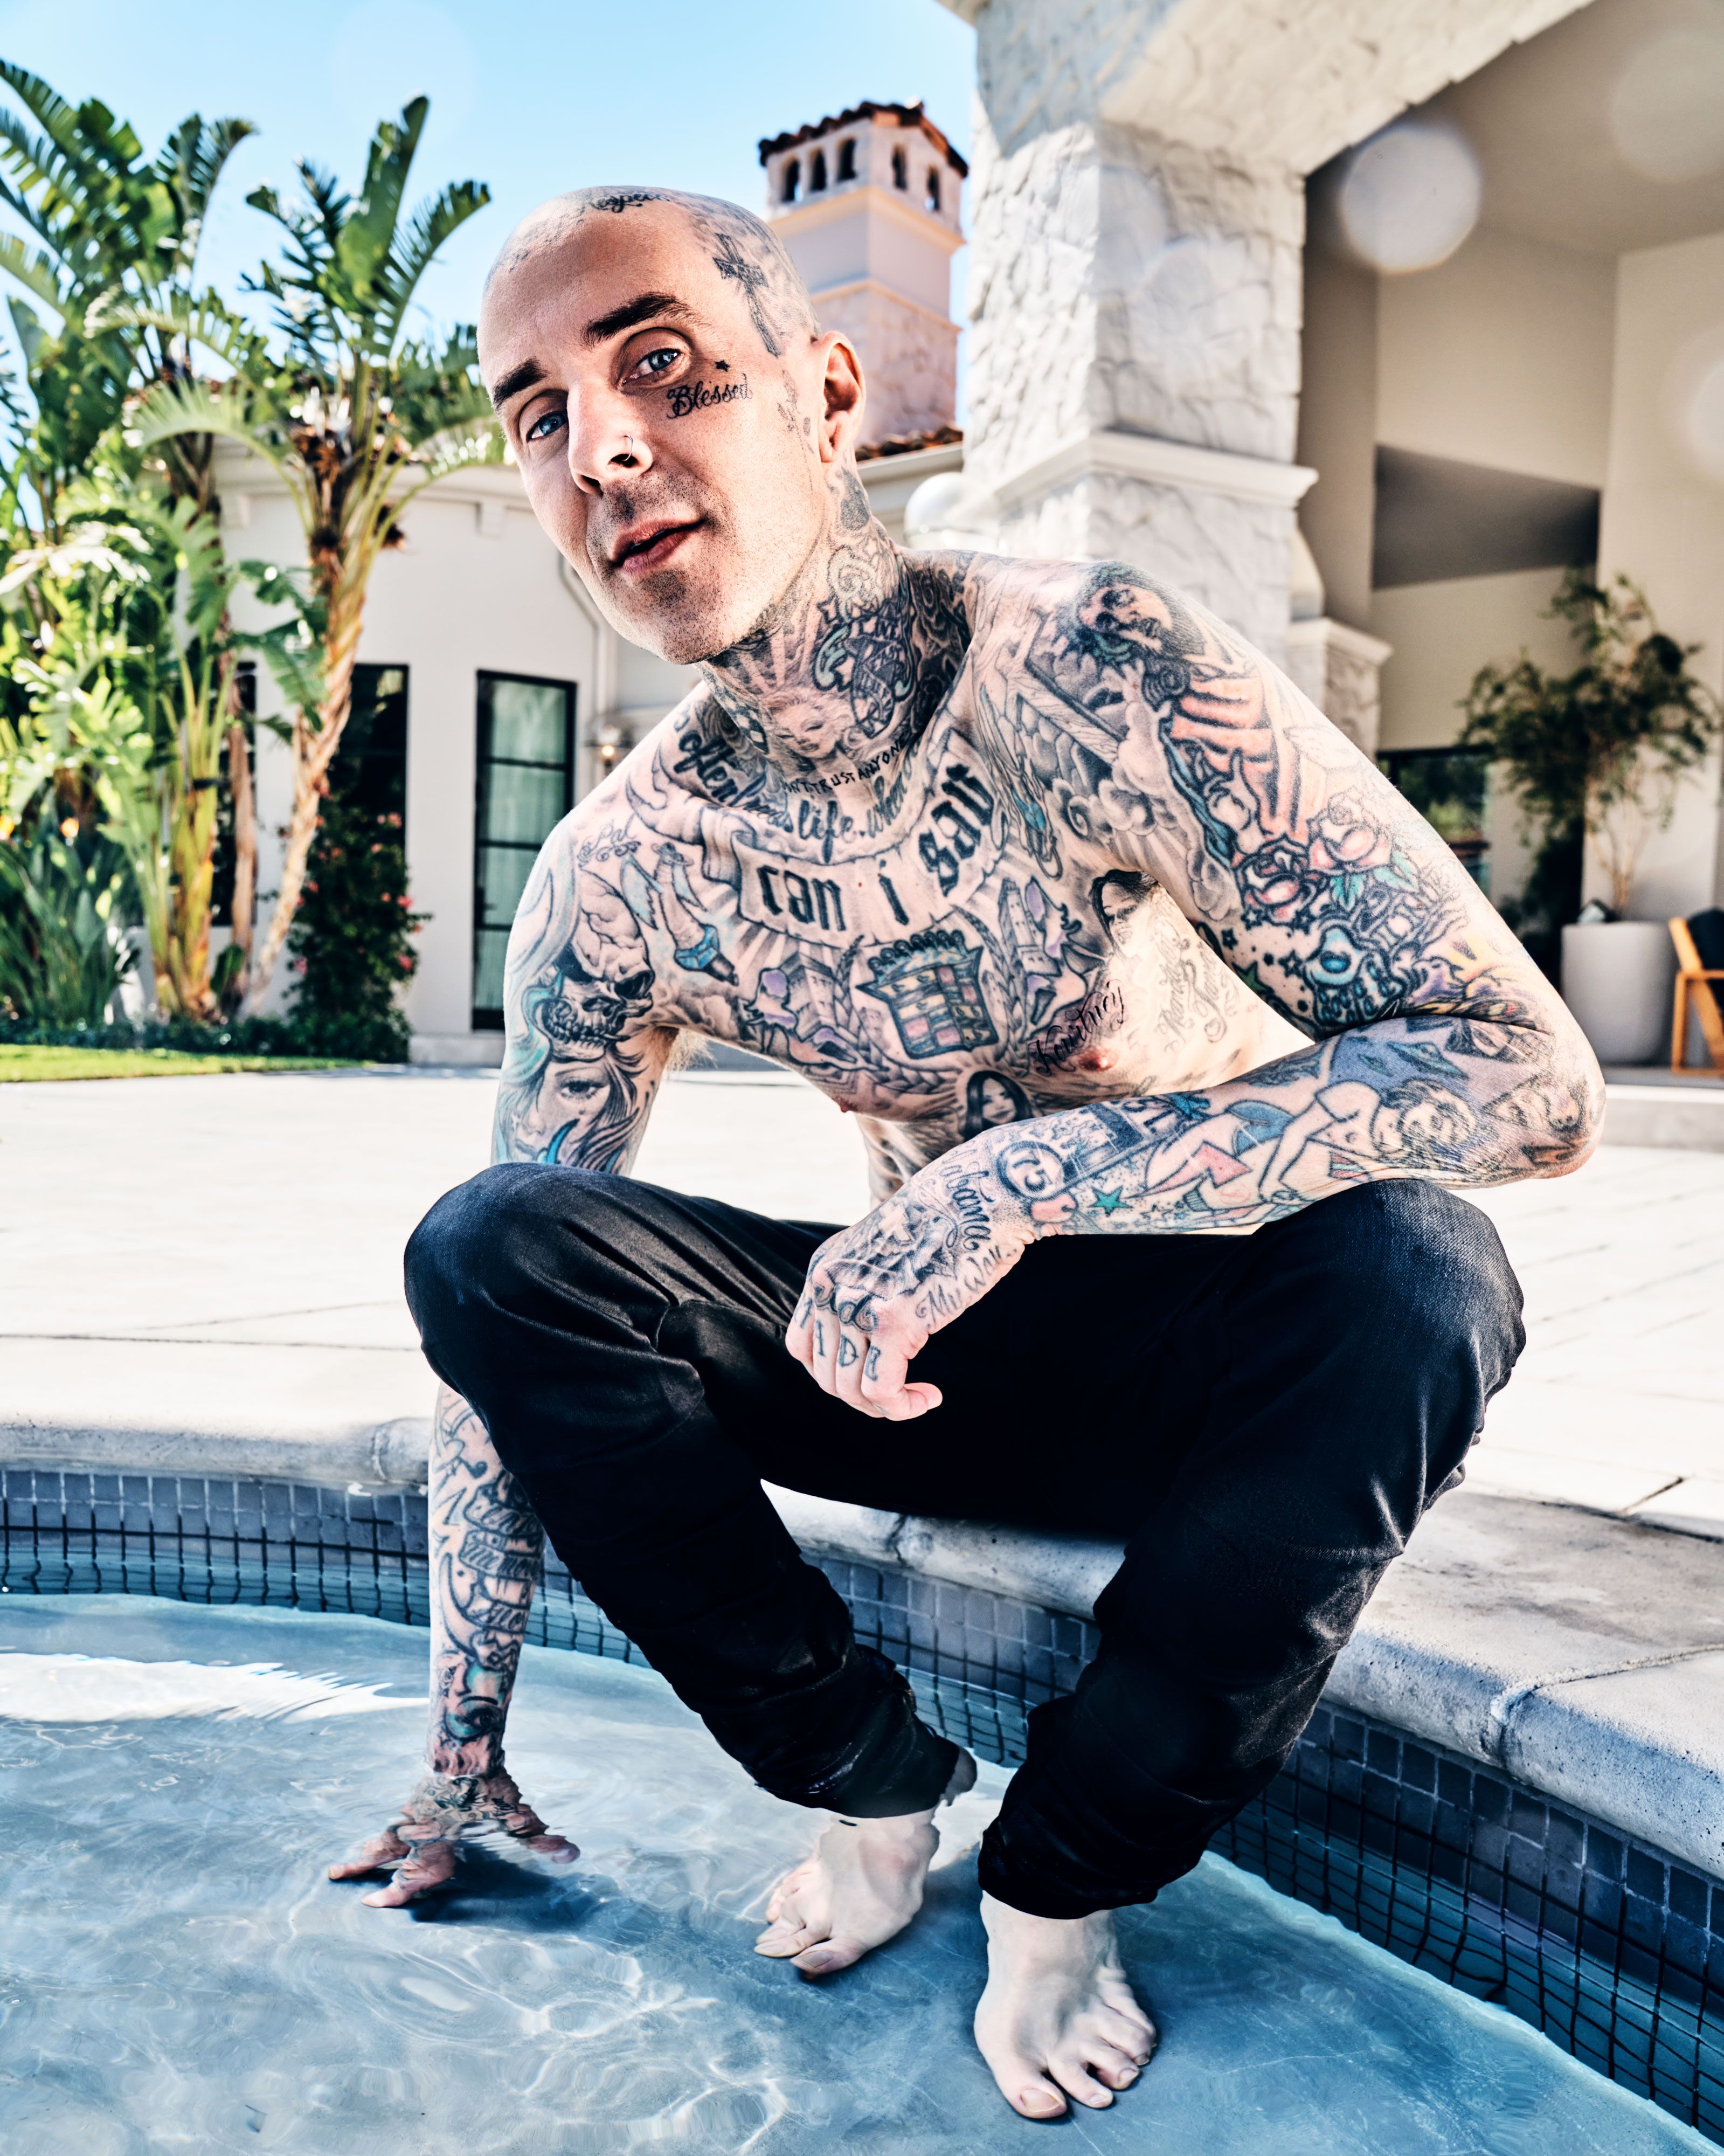 Why Was Travis Barker Rushed To The Hospital In An Ambulance? The New